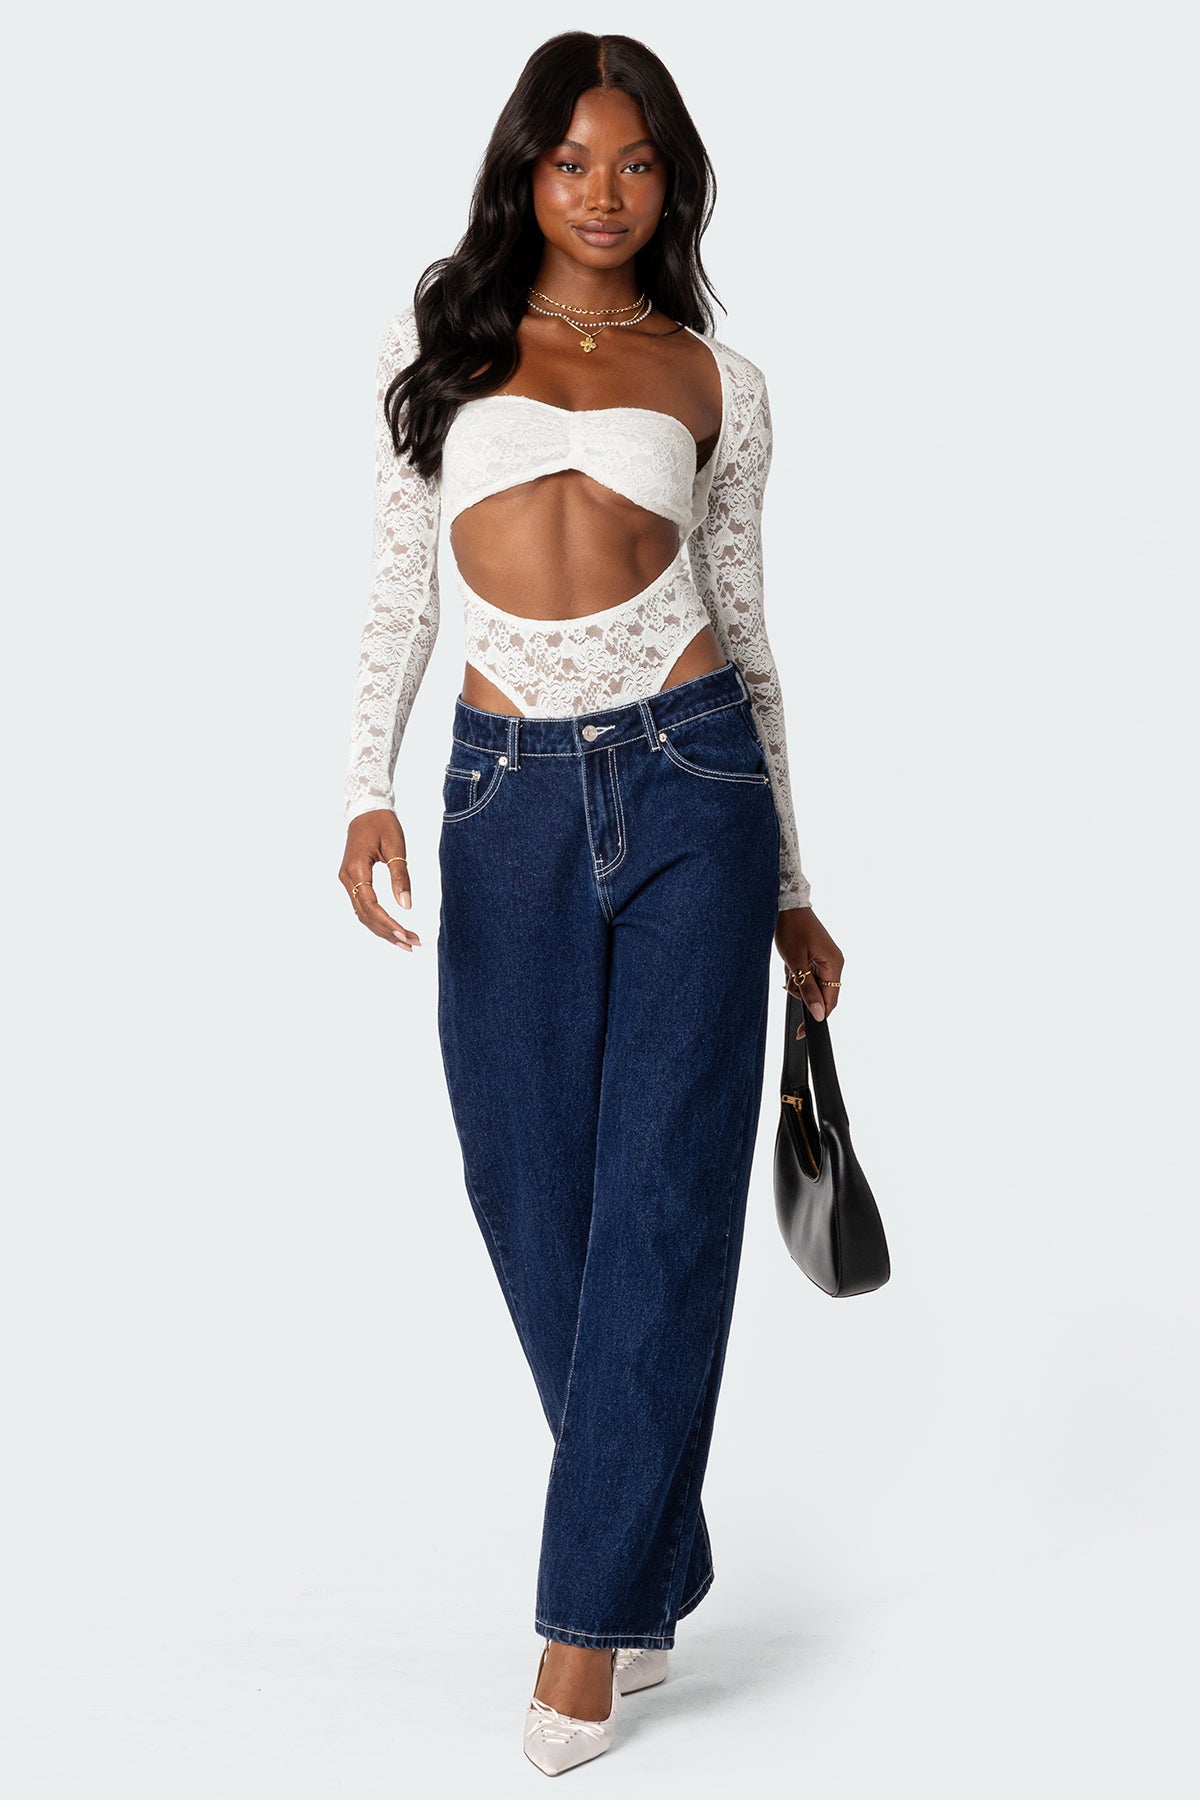 Zoey Sheer Lace Two Piece Bodysuit